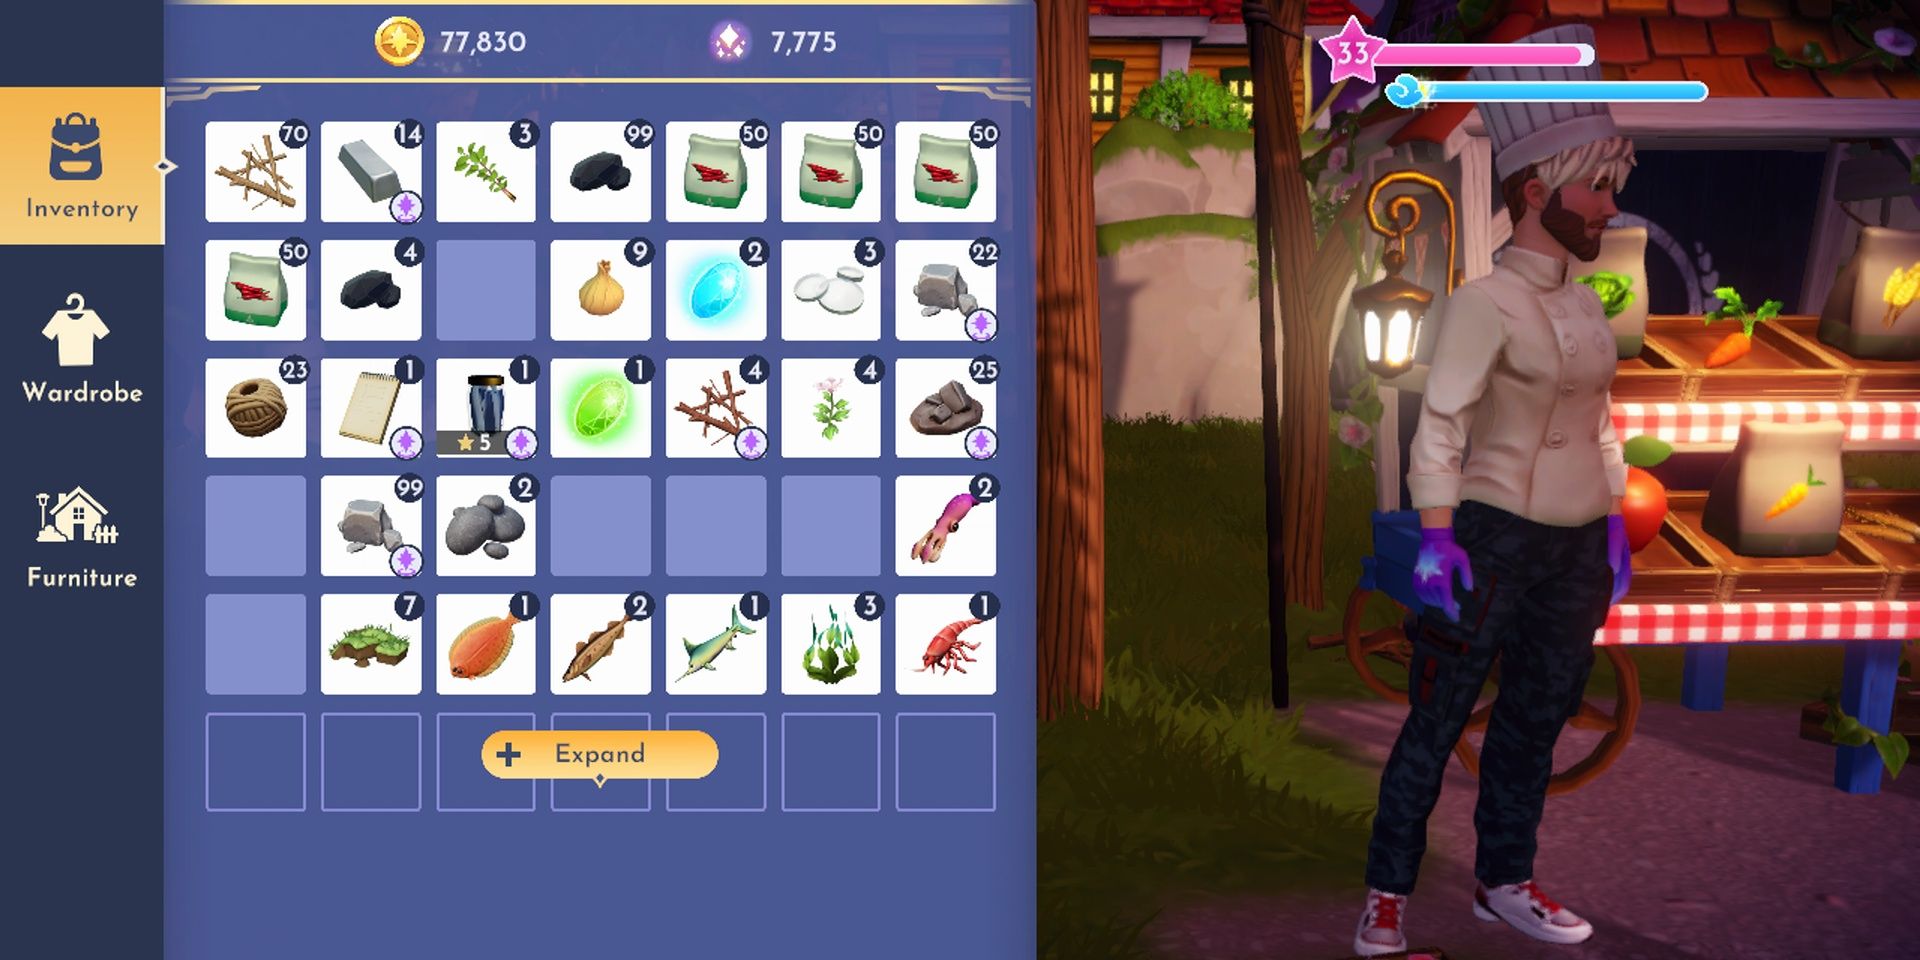 Upgrading the inventory is vital in Disney Dreamlight Valley